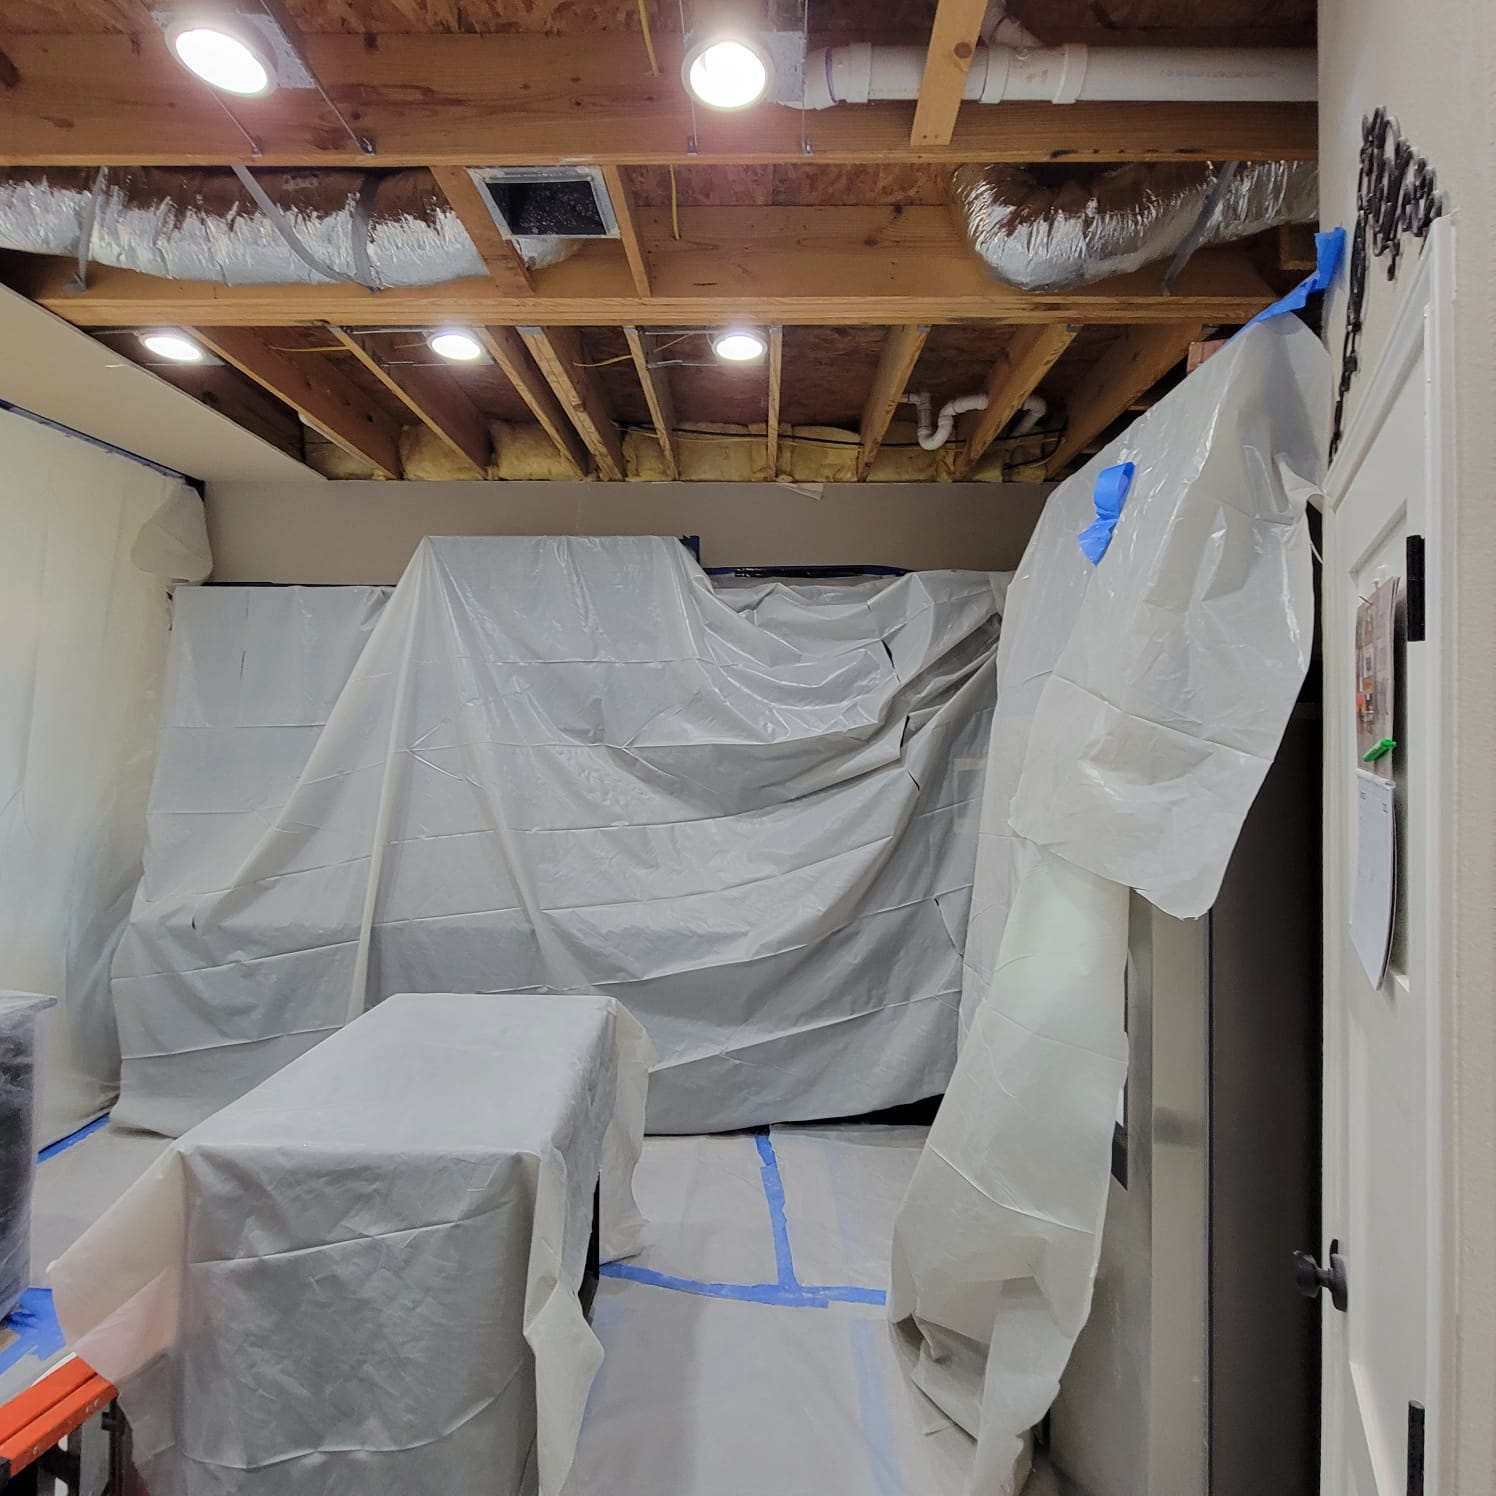 AC drainage leak that flooded the upstairs bathroom and downstairs kitchen. We set up containments, ran dehumidifiers and used air scrubbers while we removed contaminated materials.